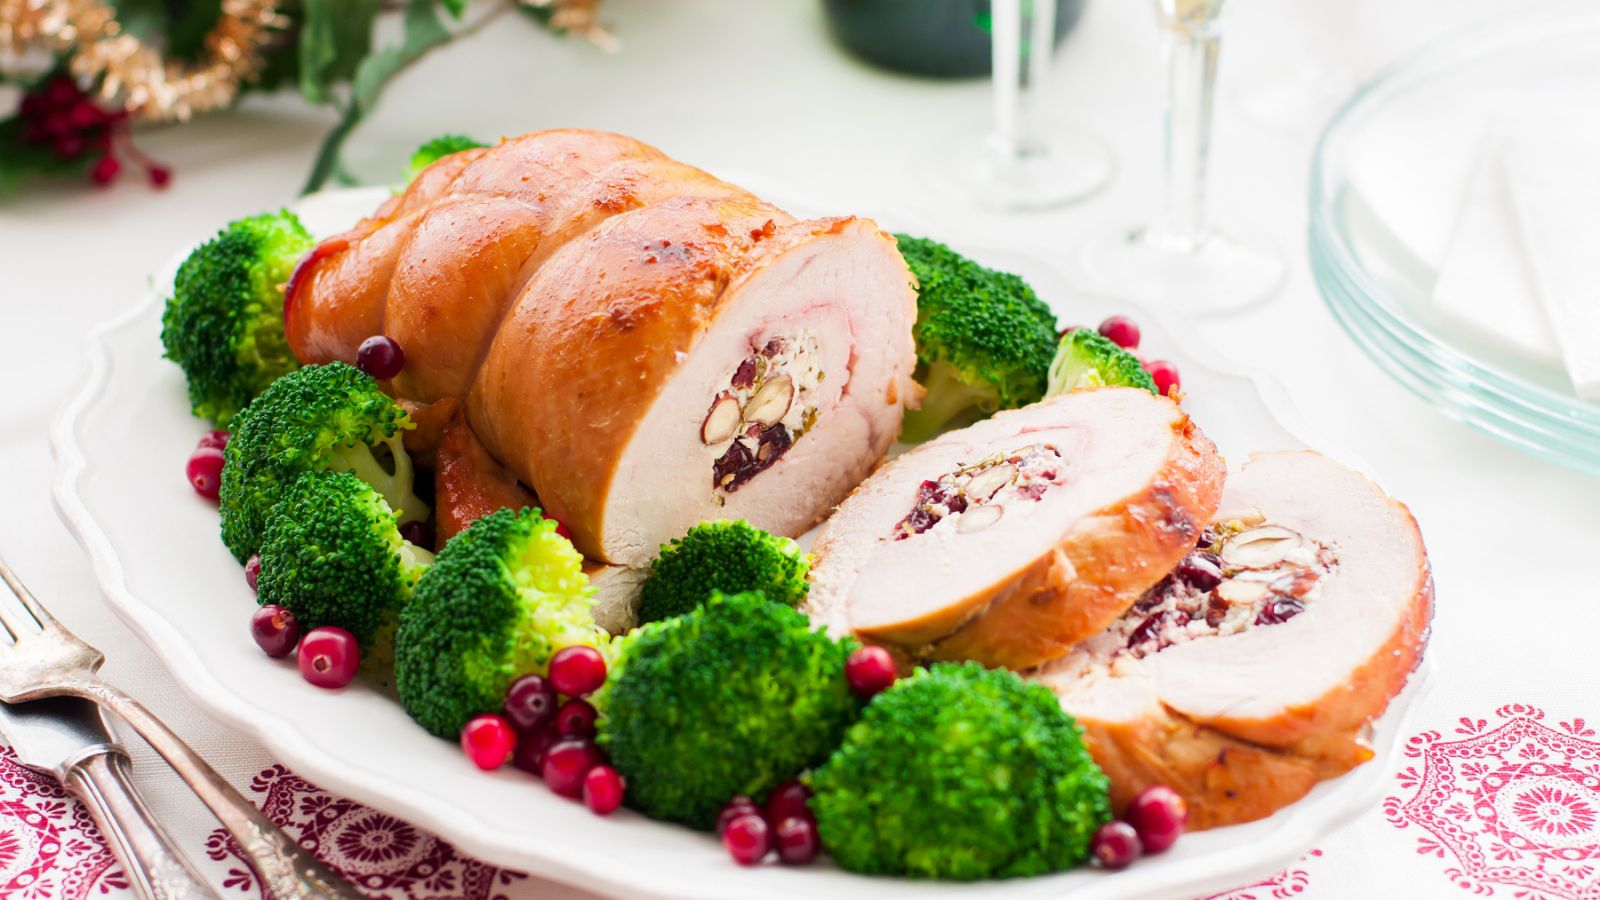 This Is What Your Family Wants For Thanksgiving Dinner: 30 Dishes To Impress